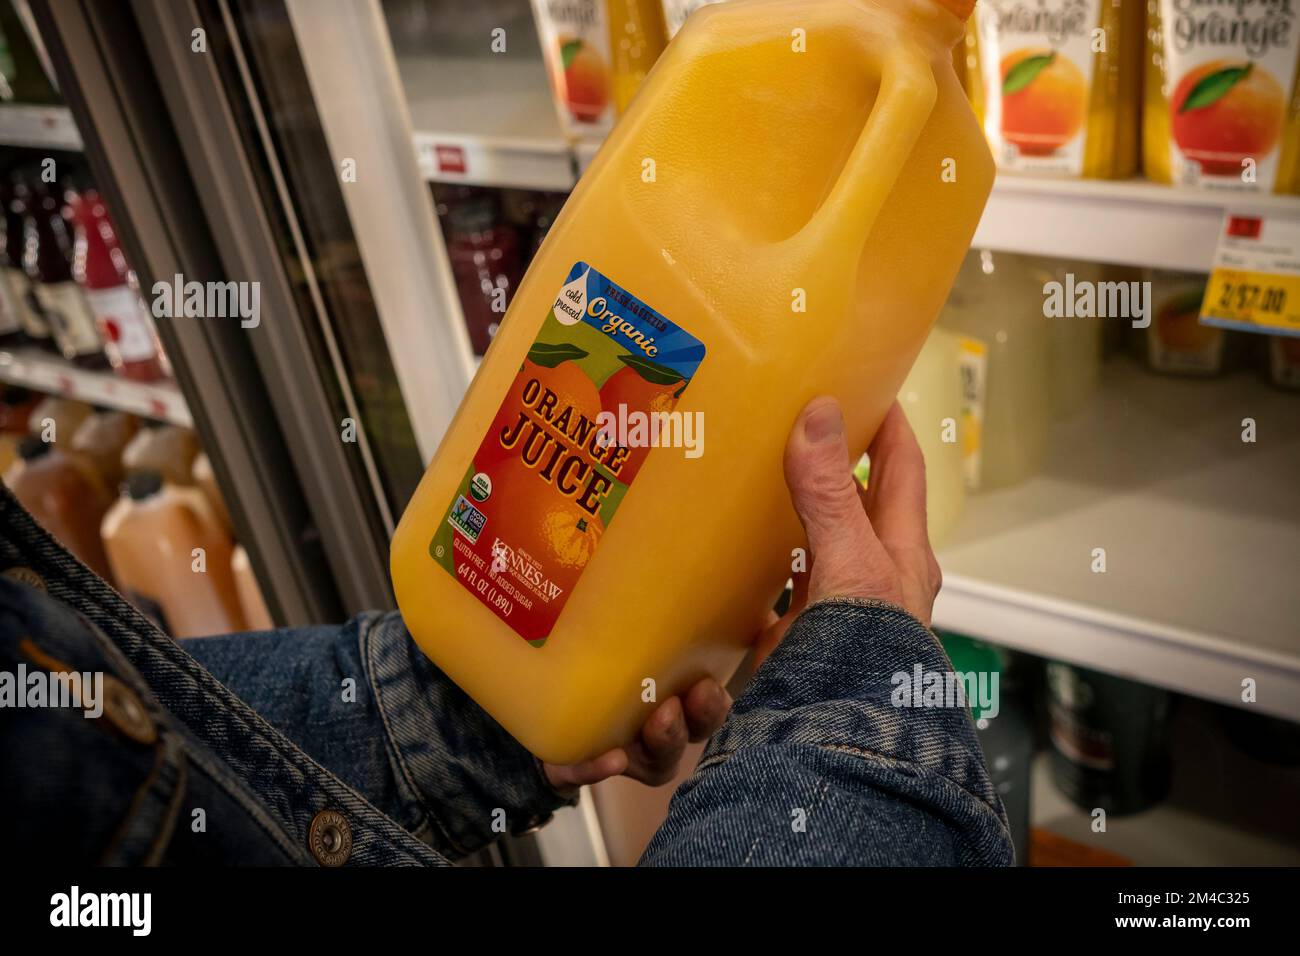 A shopper chooses a bottle of Kennesaw brand organic  Florida orange juice in a supermarket in New York on Wednesday, December 14, 2022. Citrus greening and extreme weather combined are expected to effect FloridaÕs orange crop driving it to the lowest level in over 80 years.  (© Richard B. Levine) Stock Photo